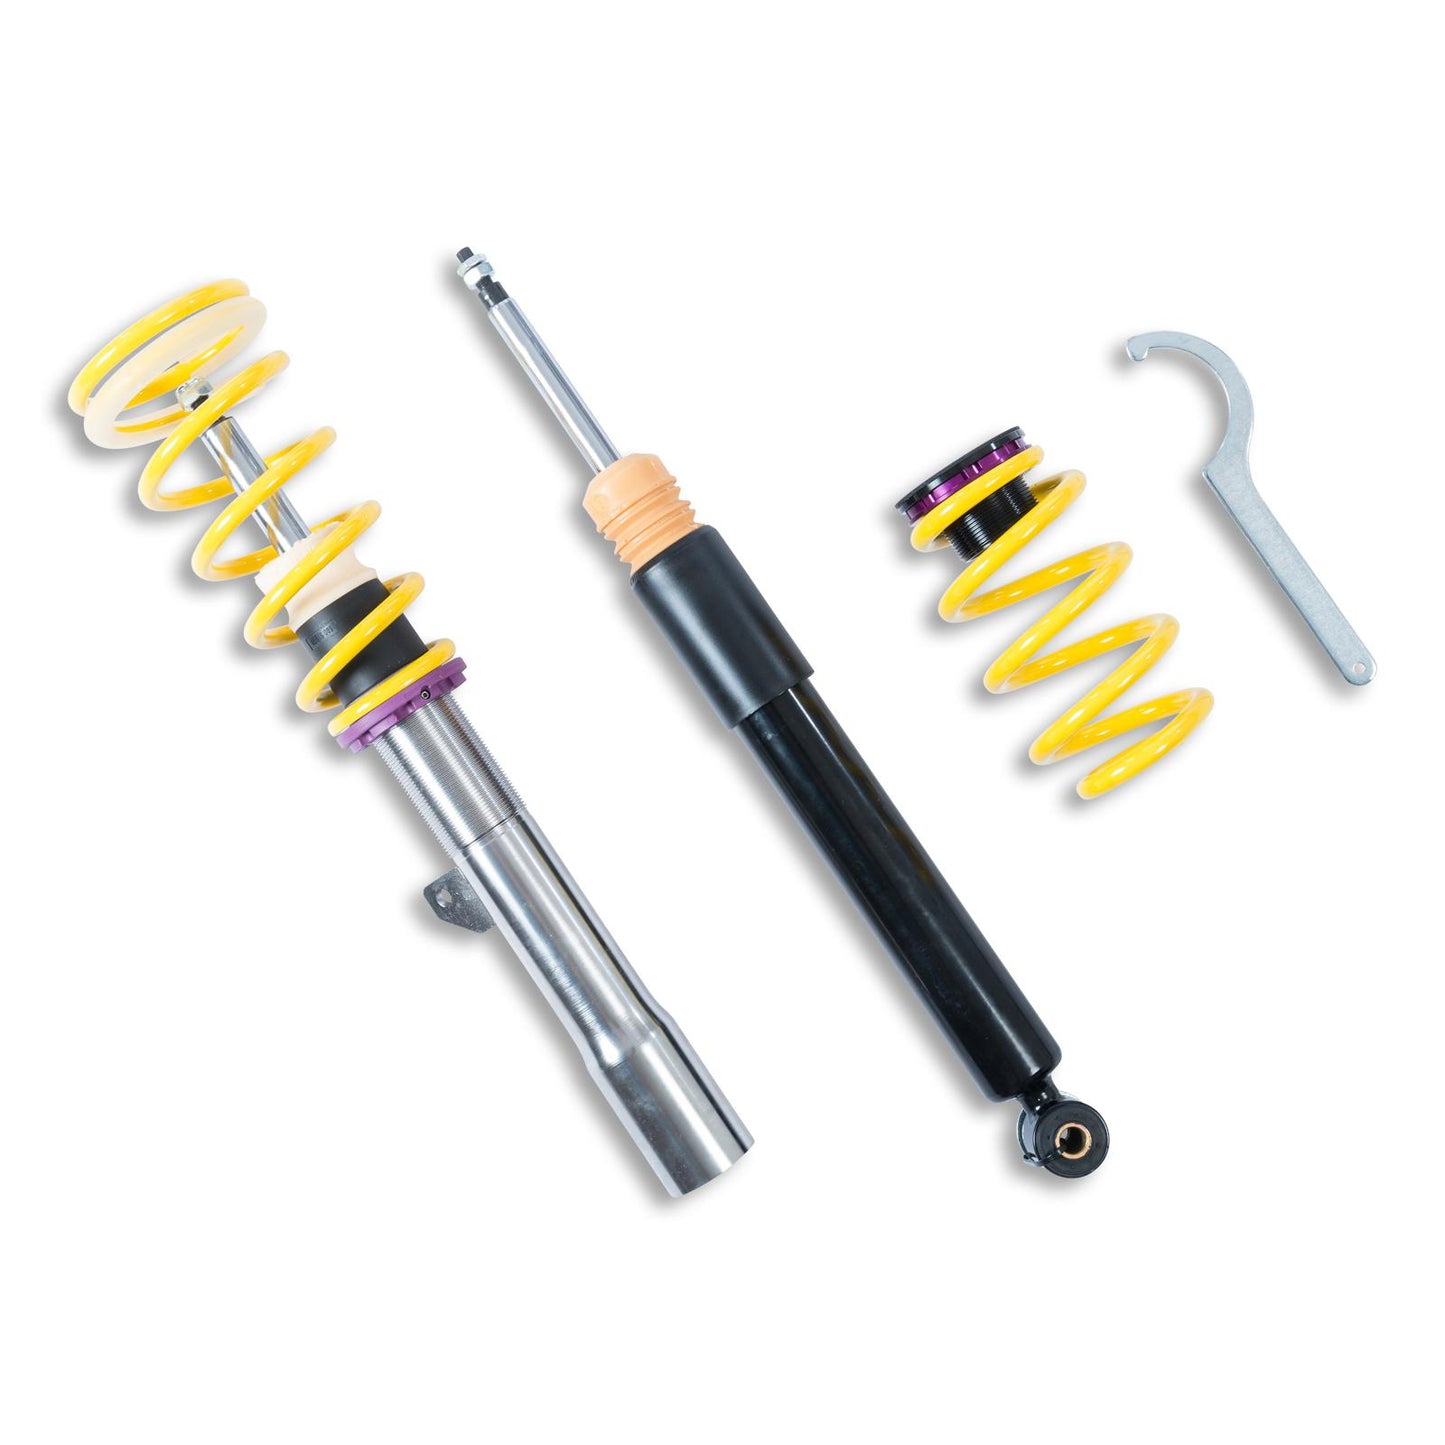 KW Audi B7 B8 B8.5 Variant 1 Coilover kit (A4 & A5) - Inc. Deactivation For Electronic Damper | ML Performance UK 